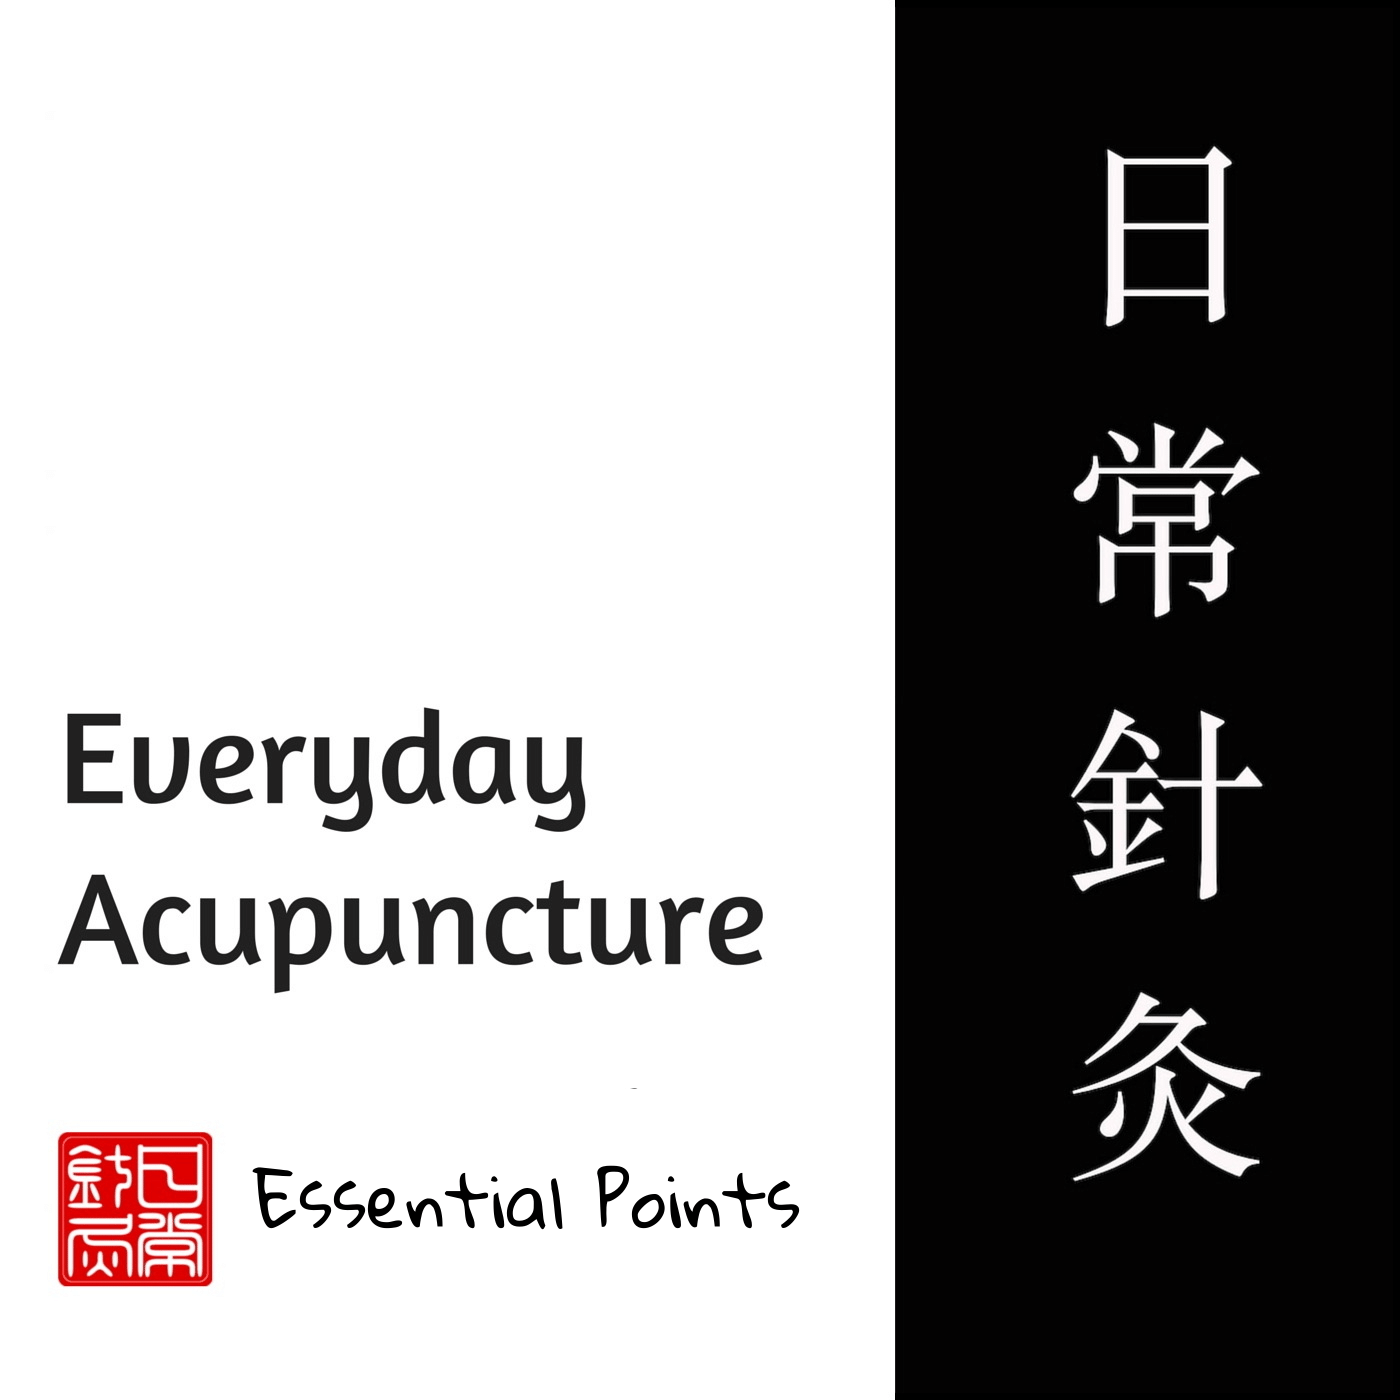 EAP-087 How to Find an Acupuncturist That is Right for You • Stacey Whitcomb L.Ac